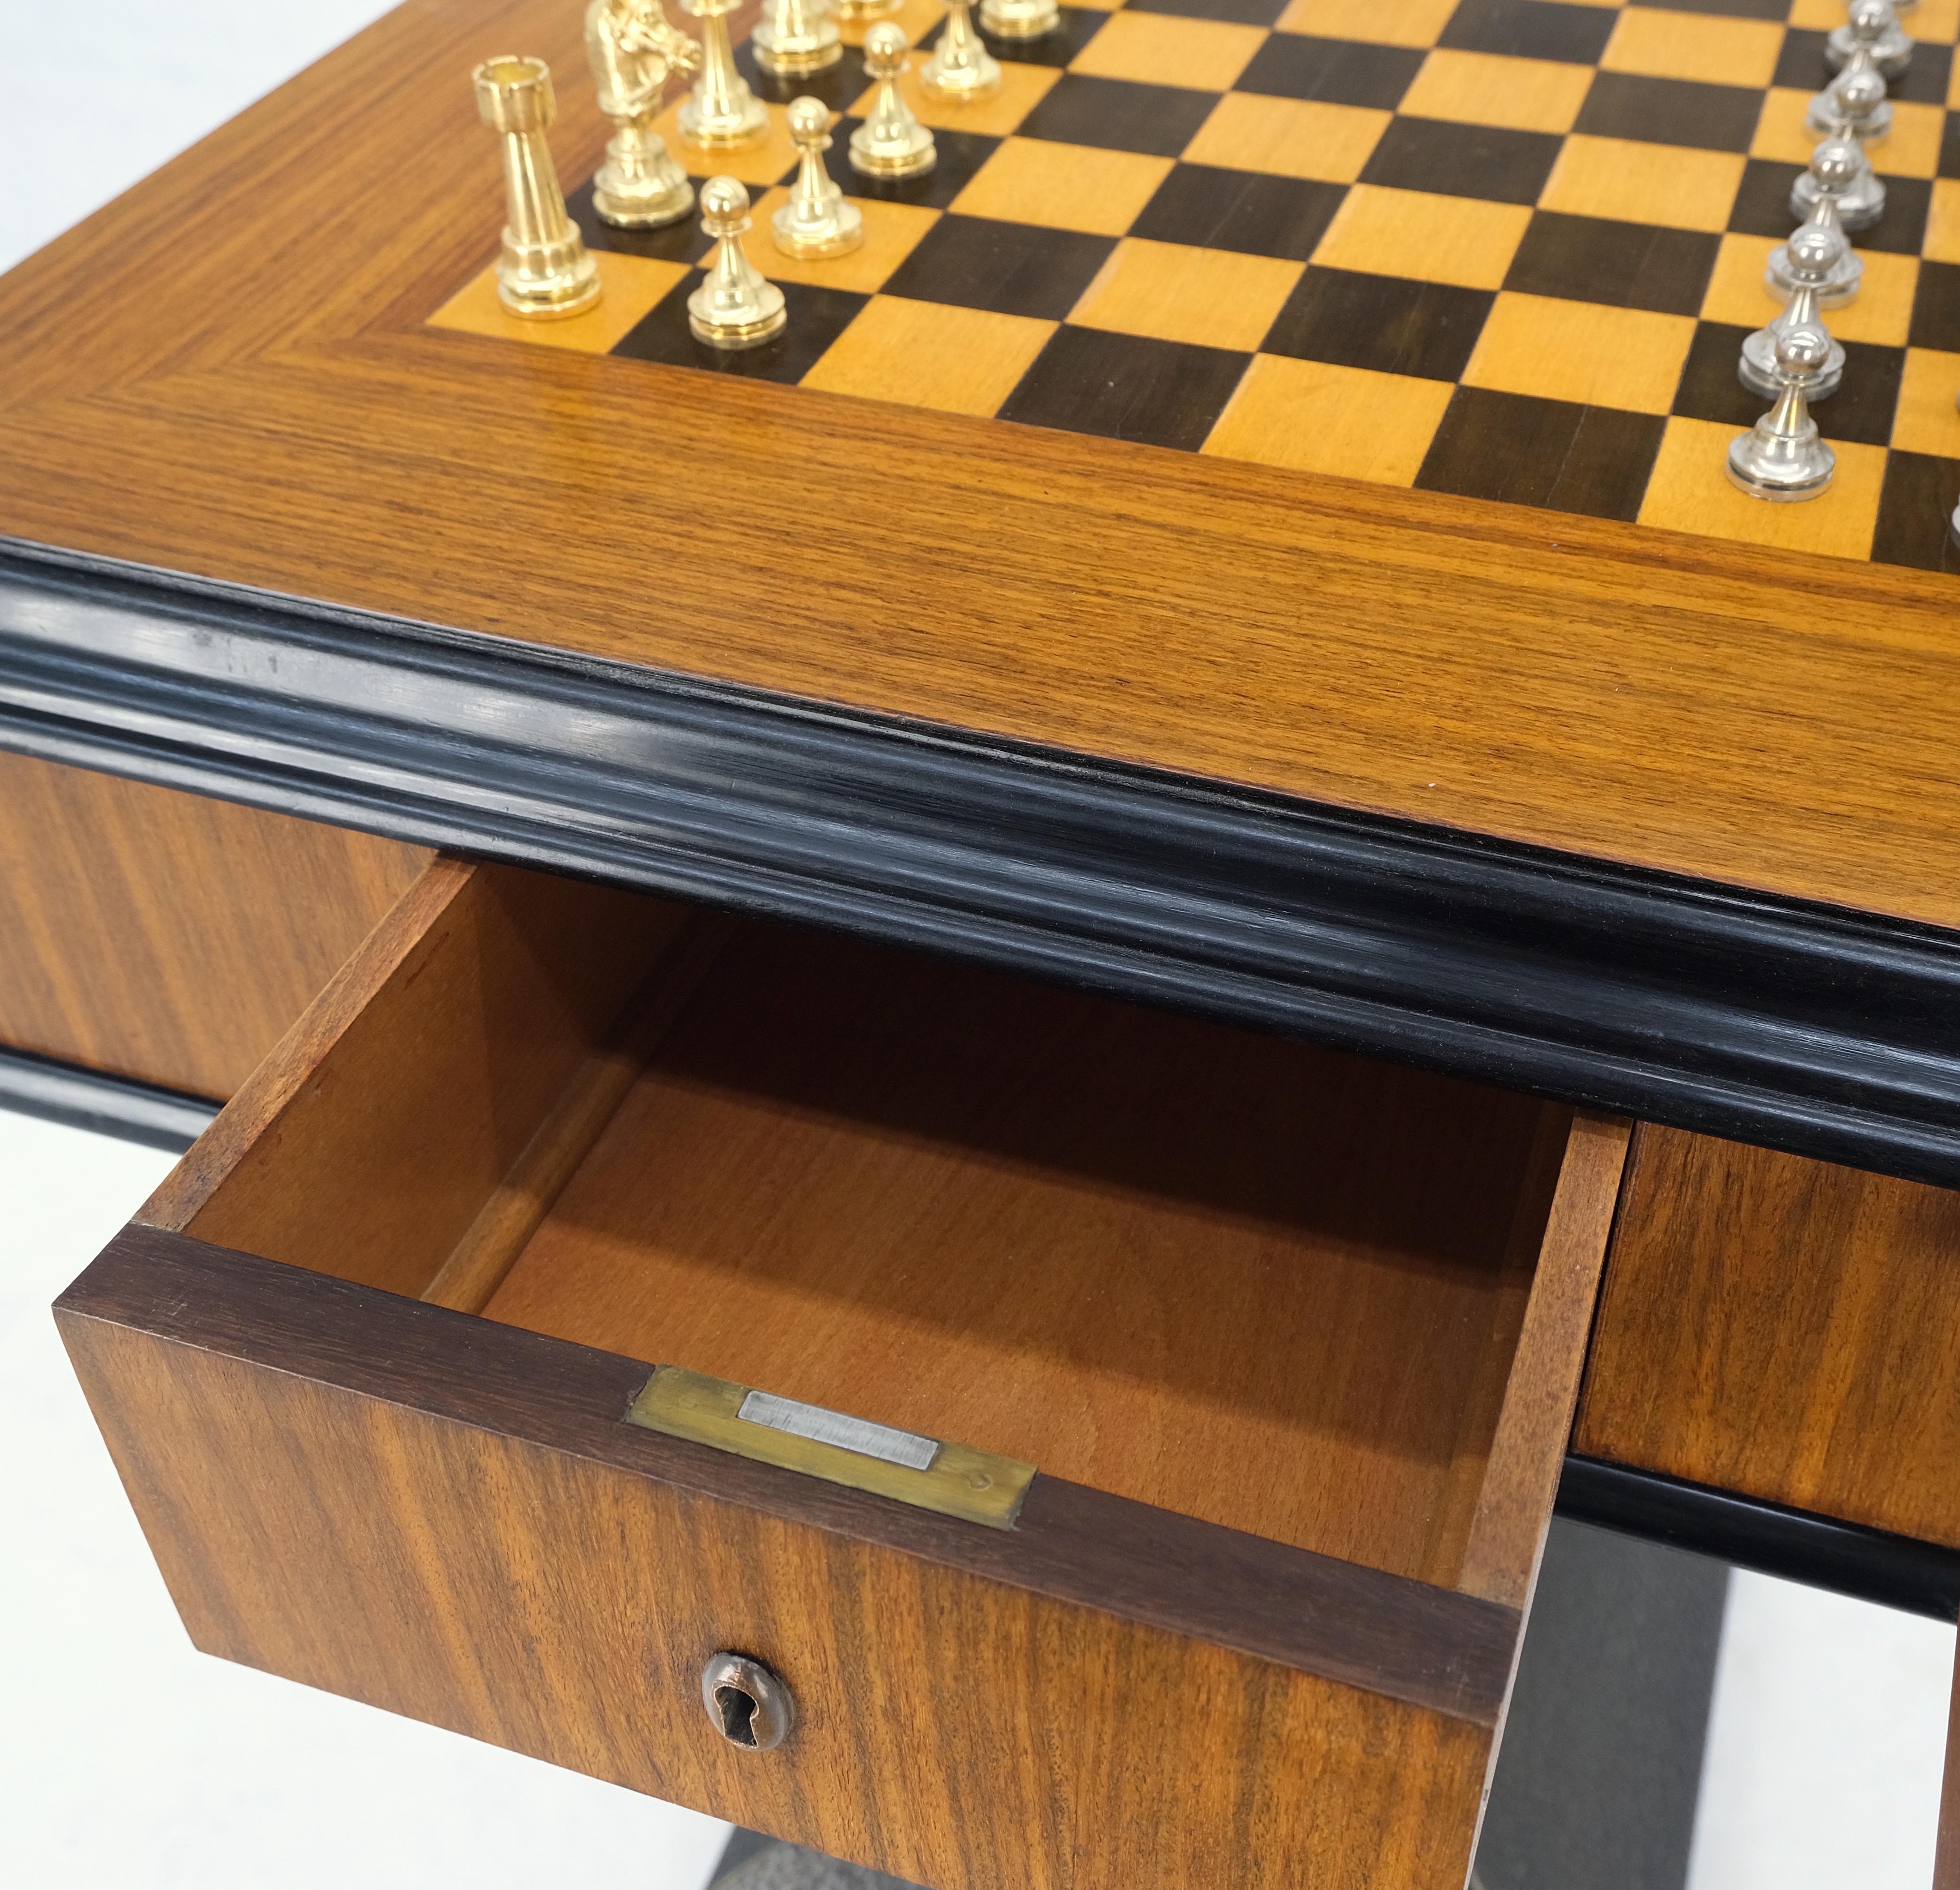 Art Deco Single Pedestal Square Game Table Pull Out Trays Chess Board Set Mint! im Angebot 3